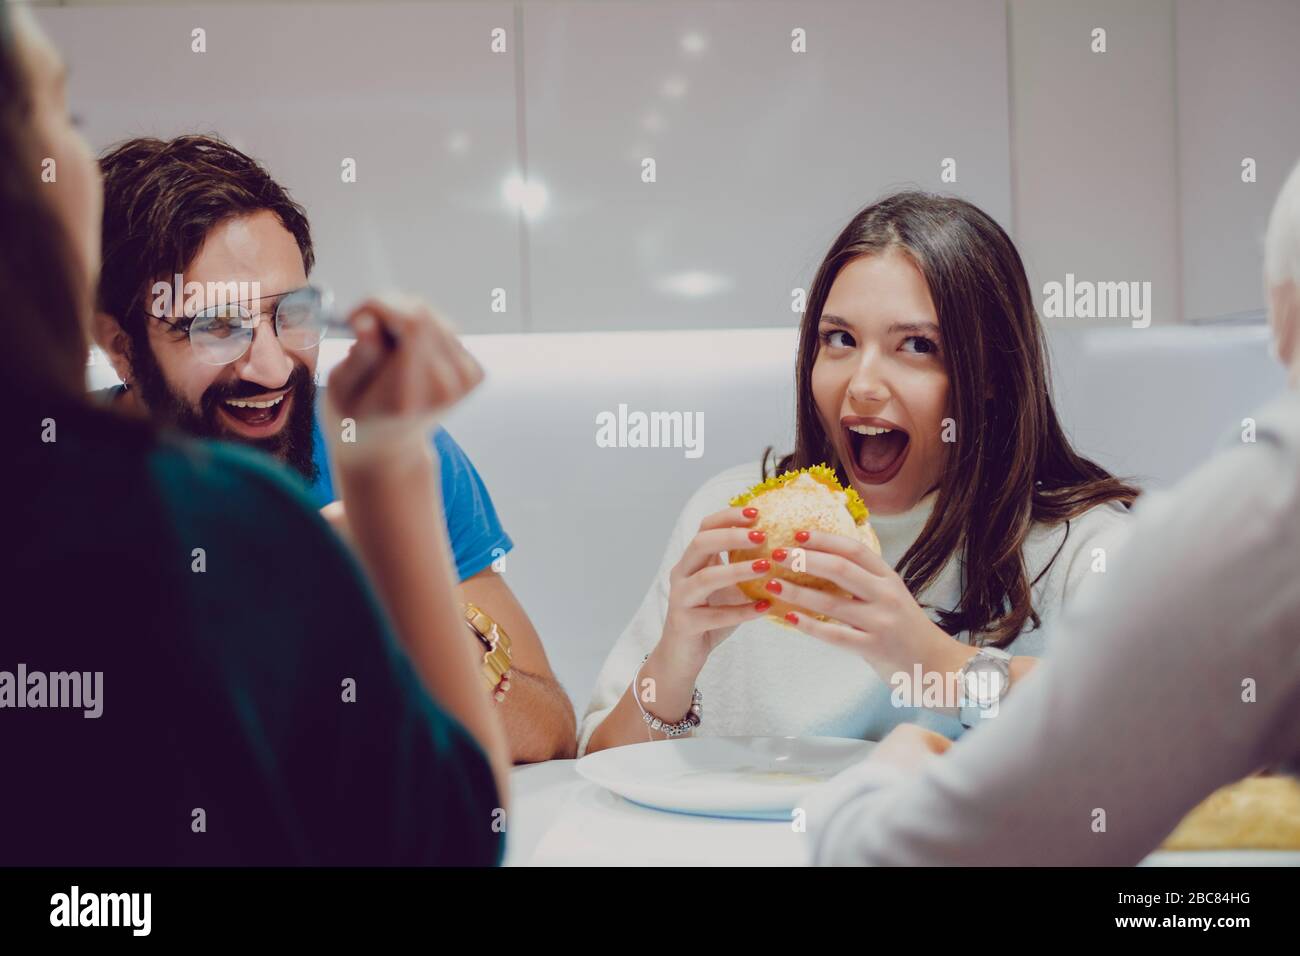 Beautiful brunette girl taking a bite of burger while friends are laughing Stock Photo